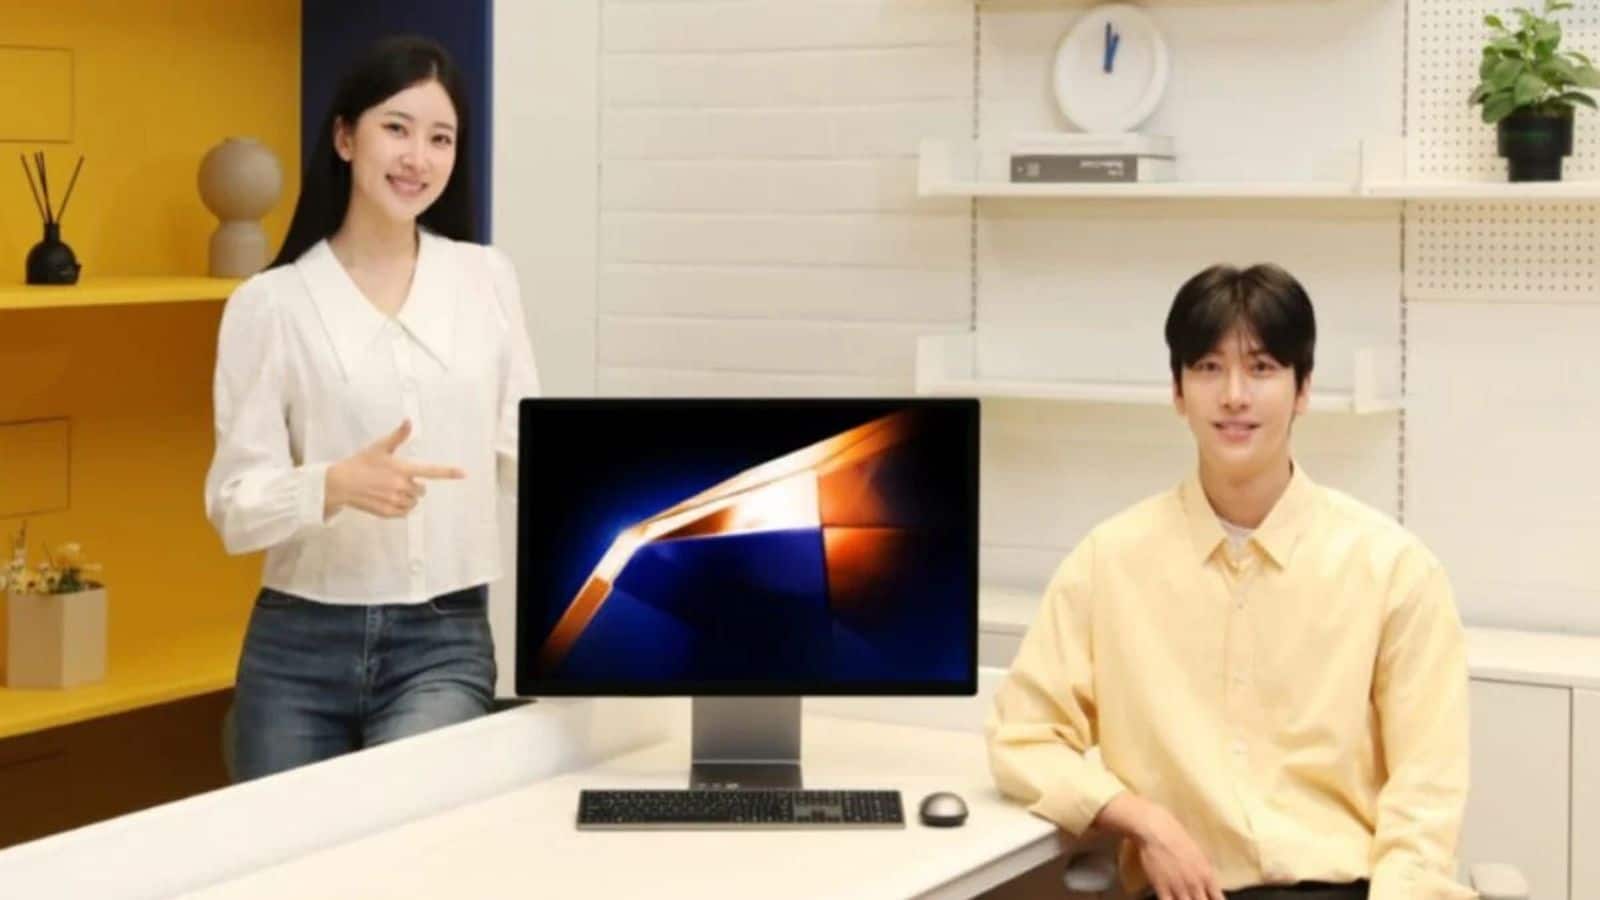 Samsung's latest all-in-one PC offers 4K screen, Intel Ultra processor